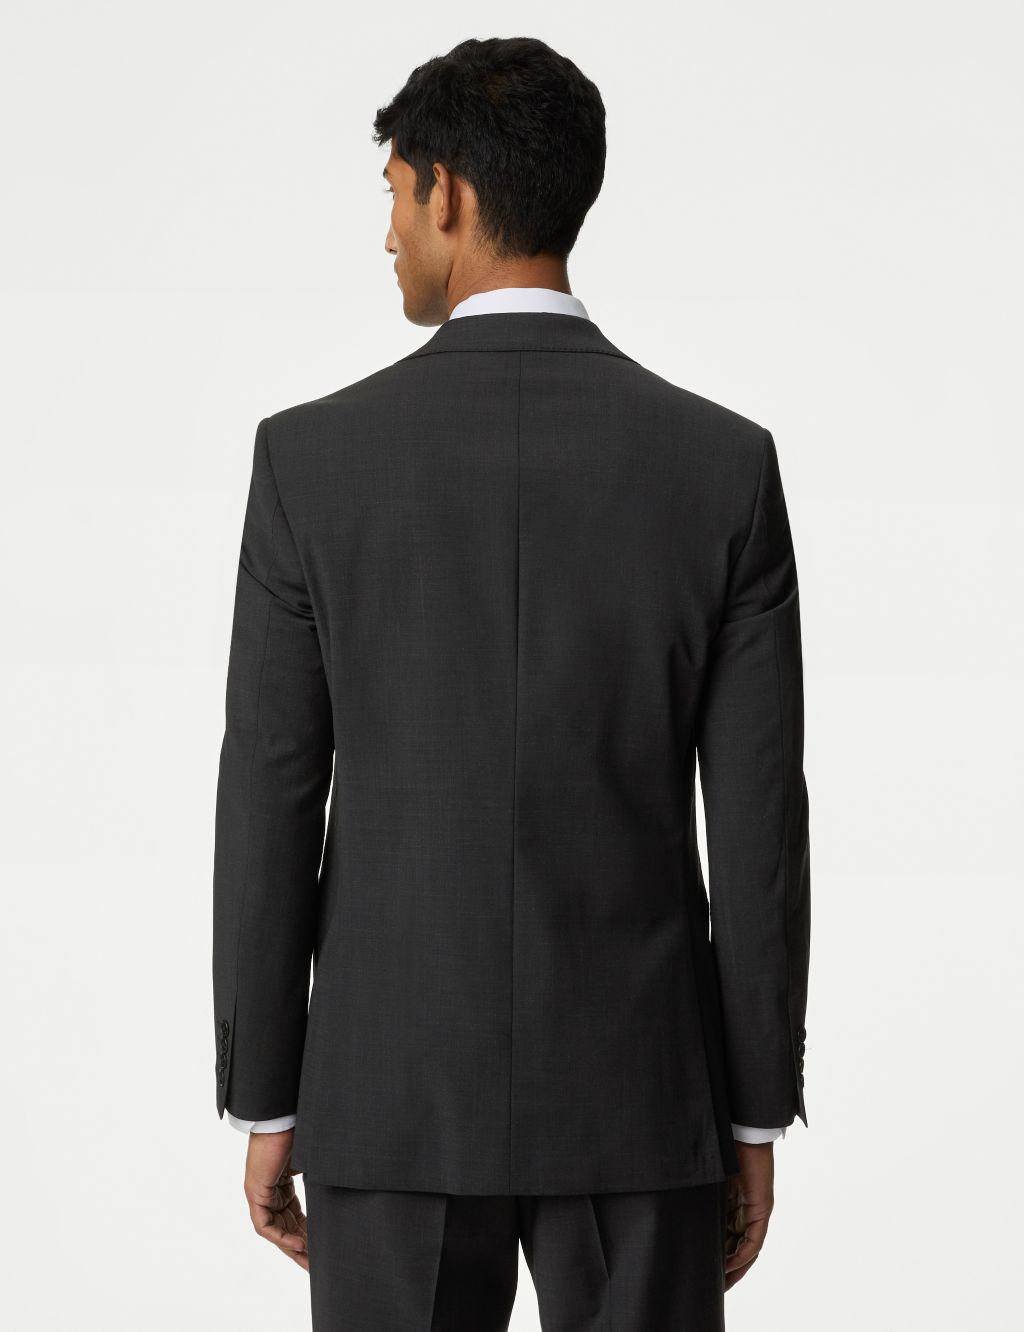 The Ultimate Tailored Fit Suit Jacket image 5